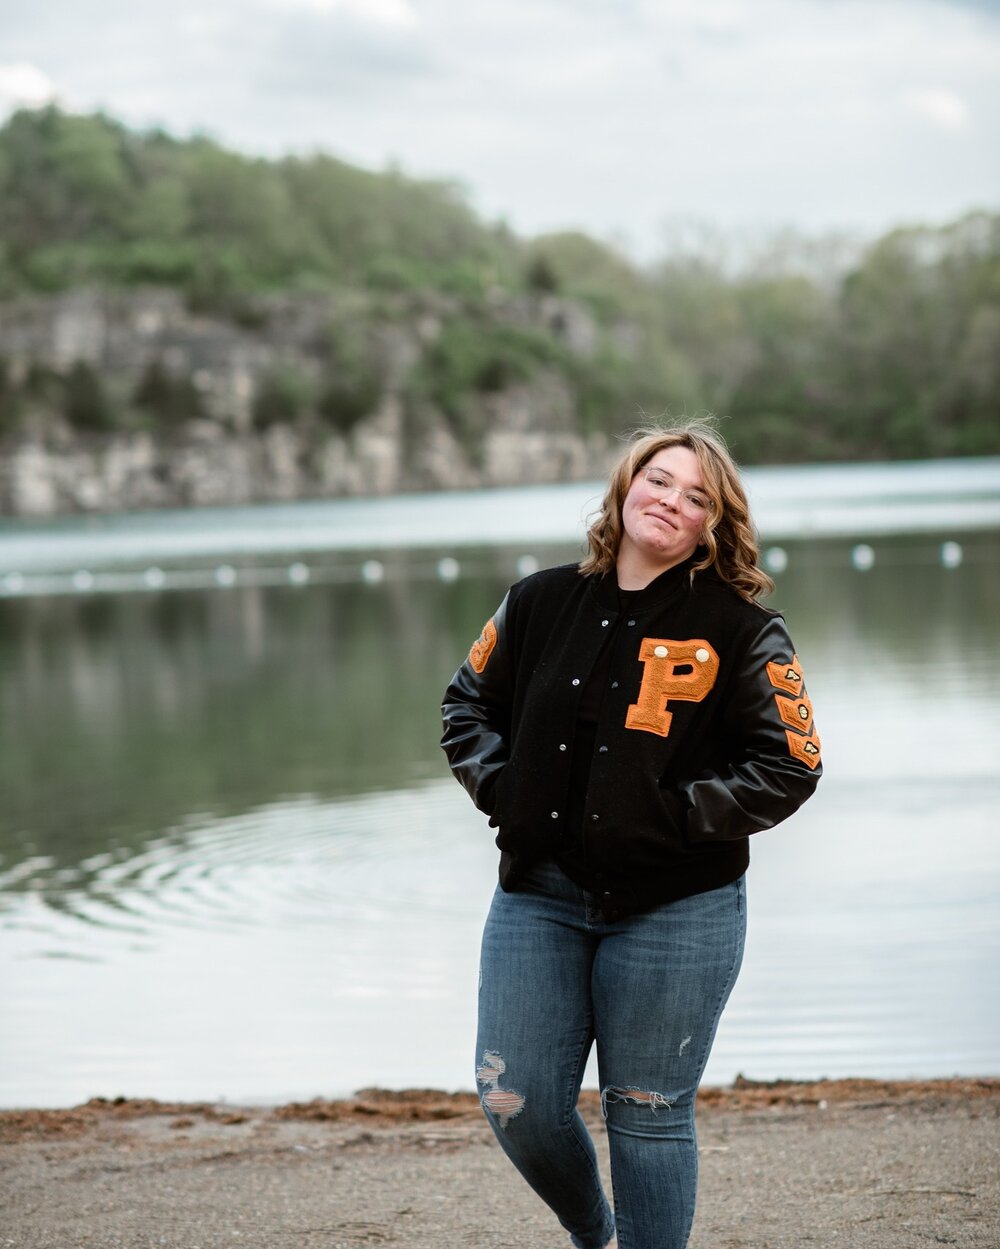 SENIOR SPOTLIGHT: Brylee
What can I say about this beautiful Girl. She Contacted me about her track banner, she doesn't run, but she does do Discus and Shot put. I was over the moon working with a sport I have never done before. Before we even met in